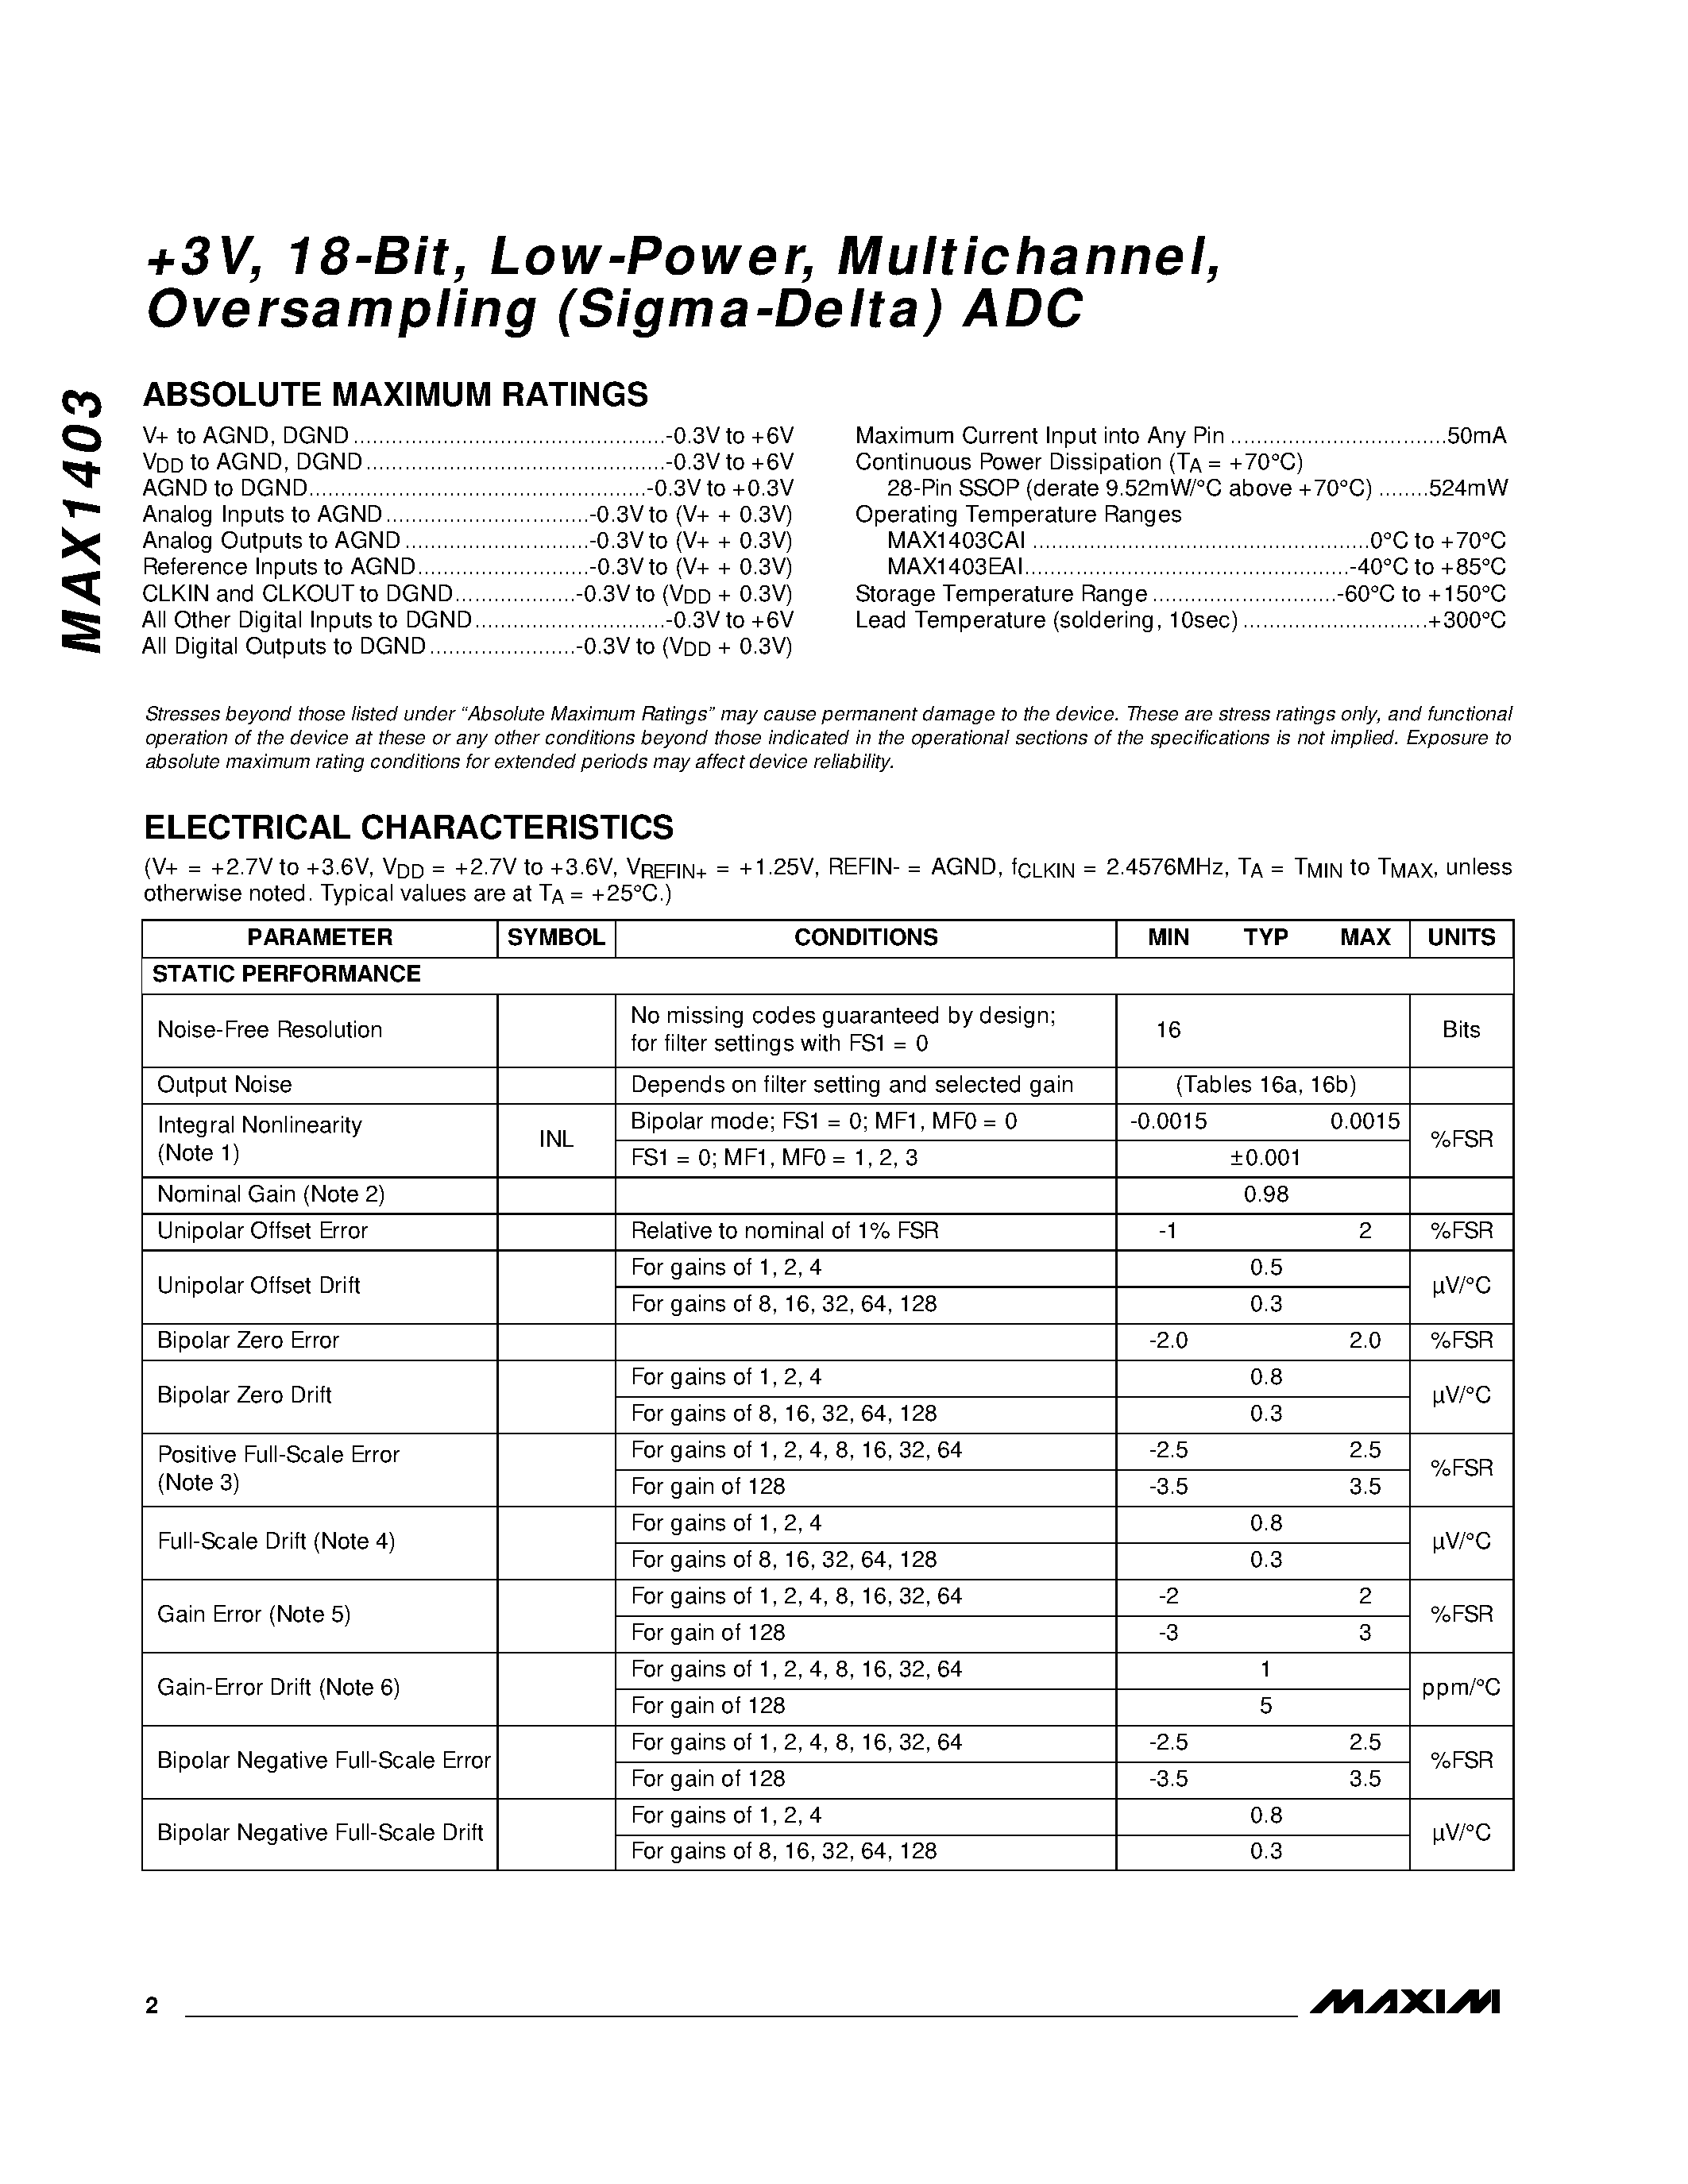 Datasheet MAX1403 - +3V / 18-Bit / Low-Power / Multichannel / Oversampling Sigma-Delta ADC page 2